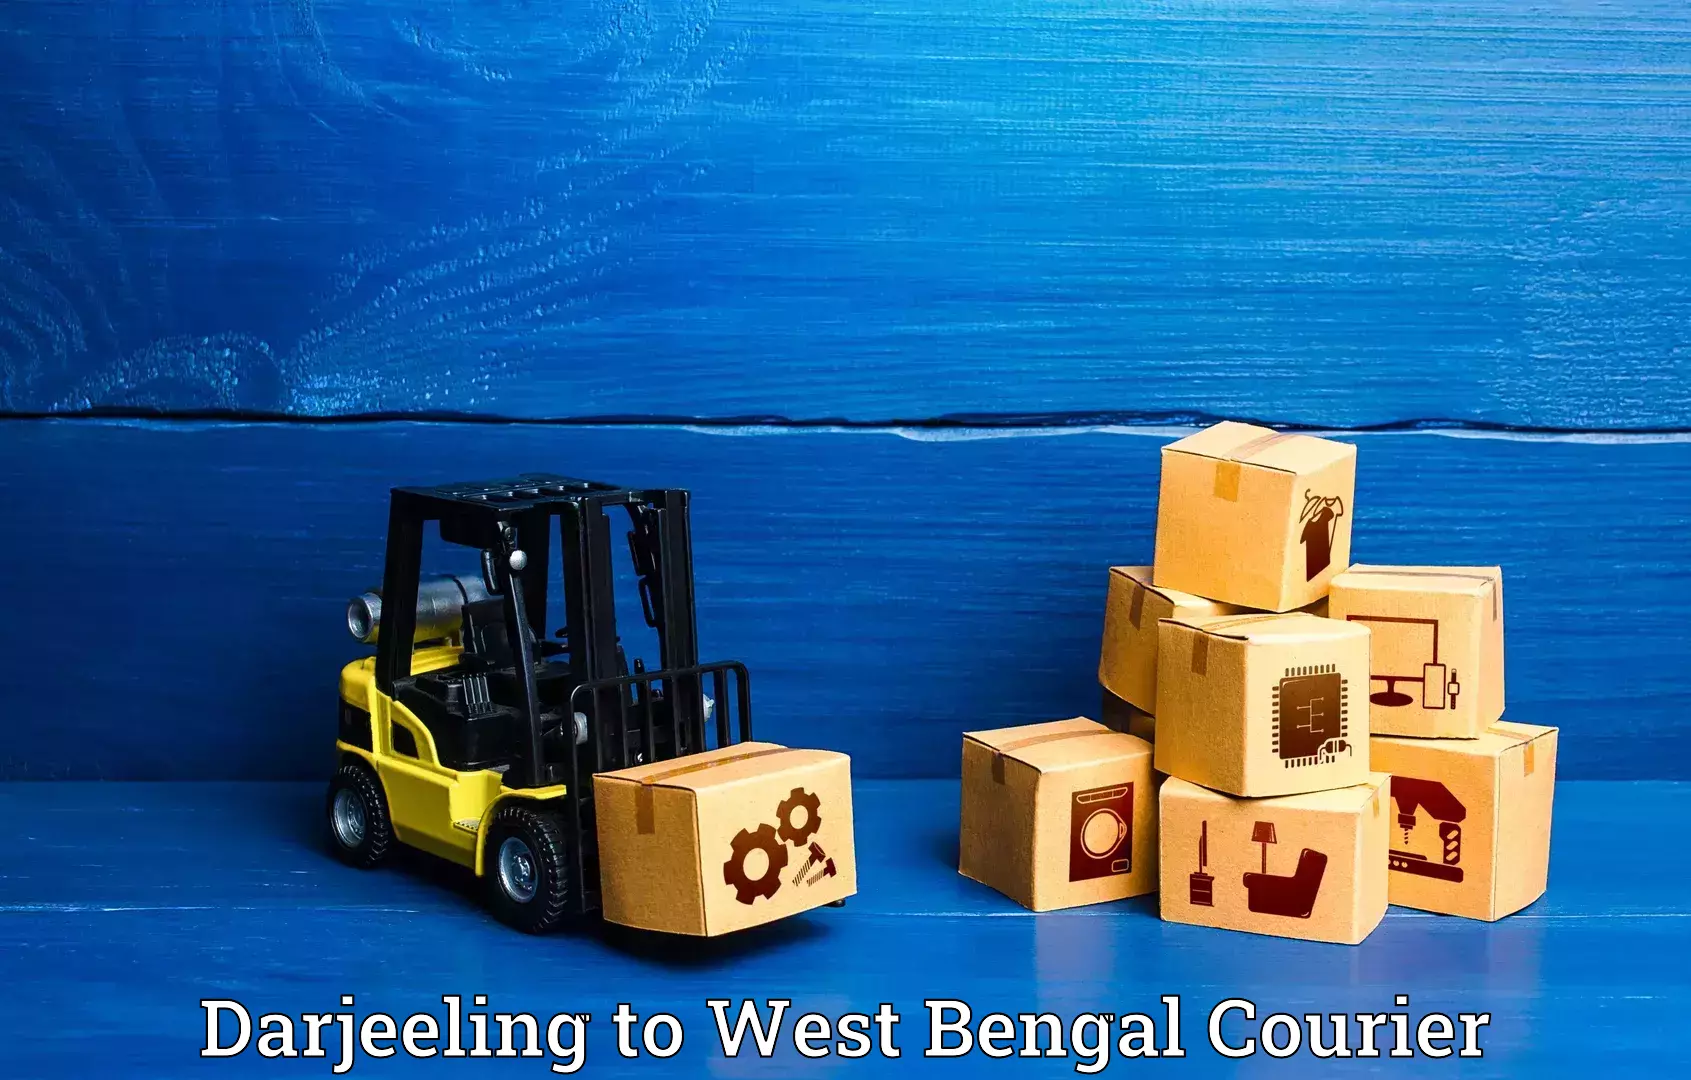 Luggage shipment specialists Darjeeling to West Bengal